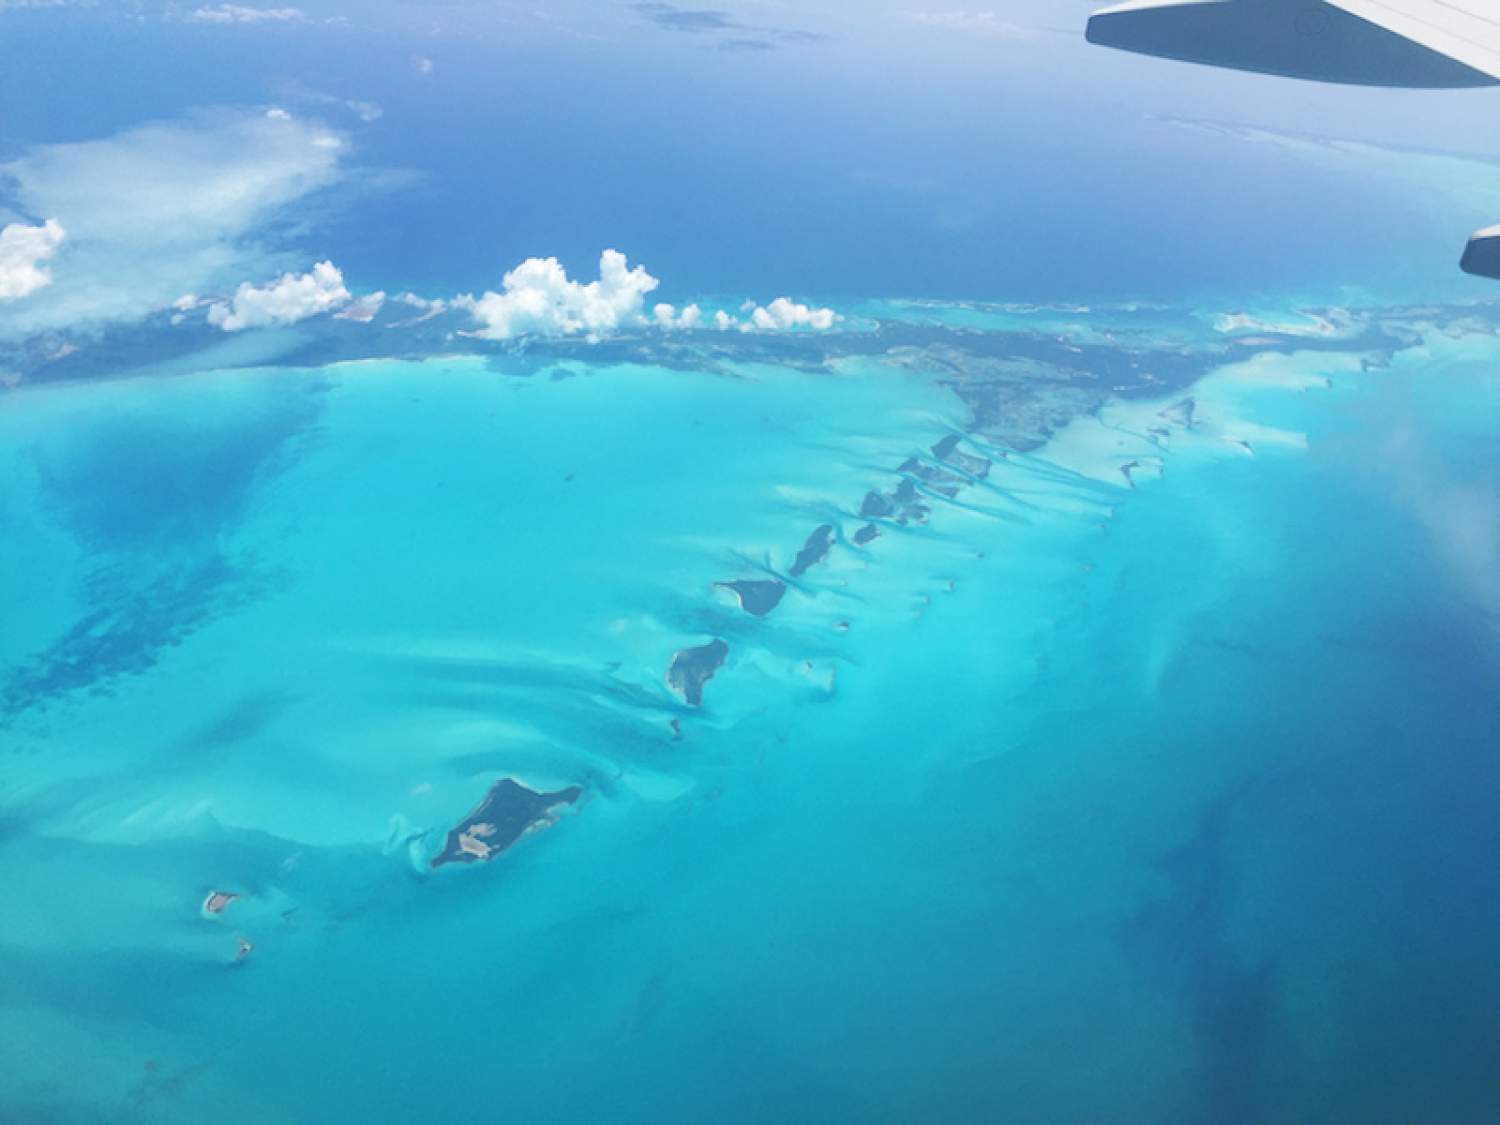 View from the plane of the Caribbean